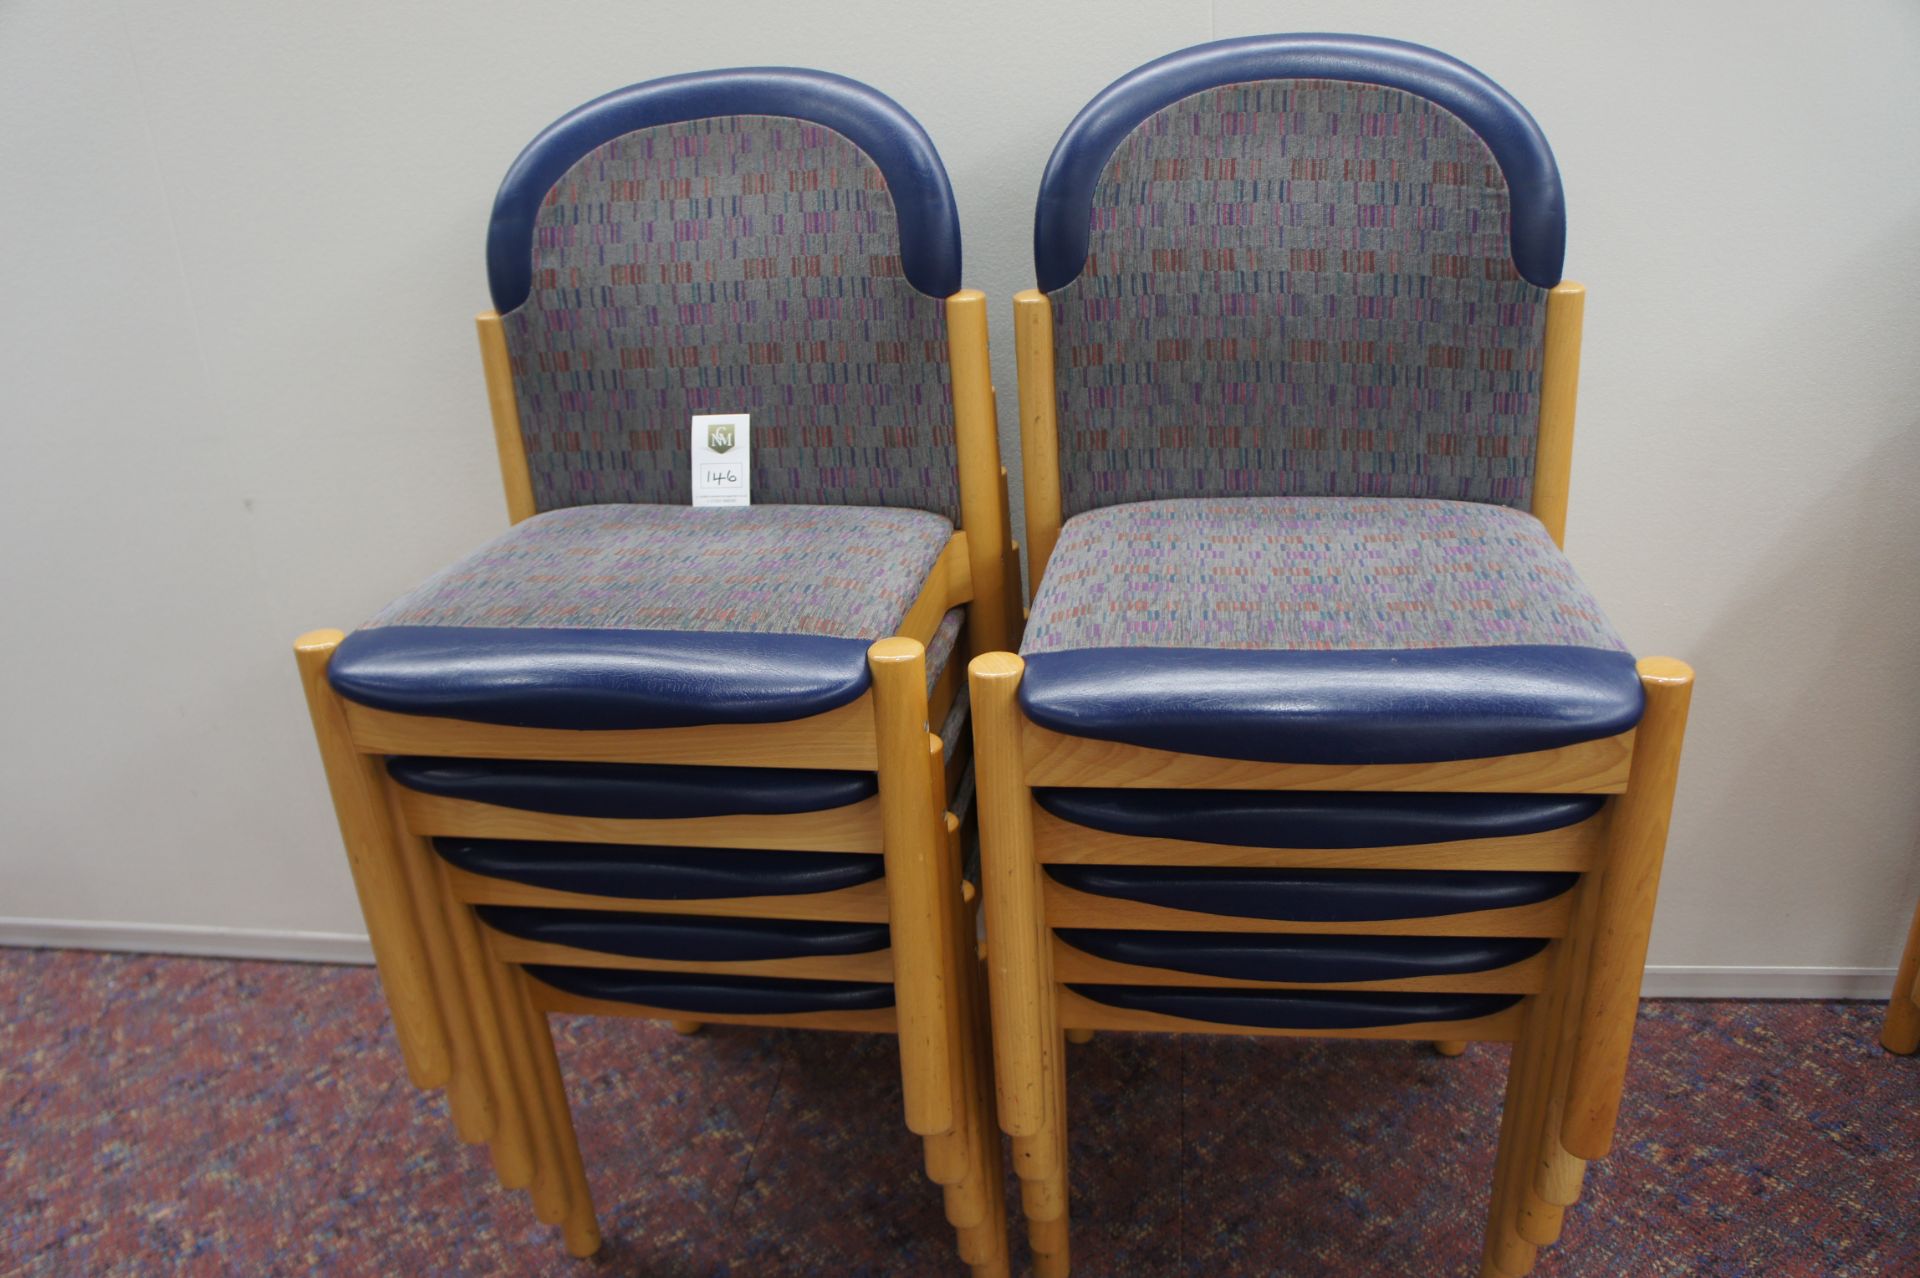 10 x timber frame chairs with padded seat and back rest